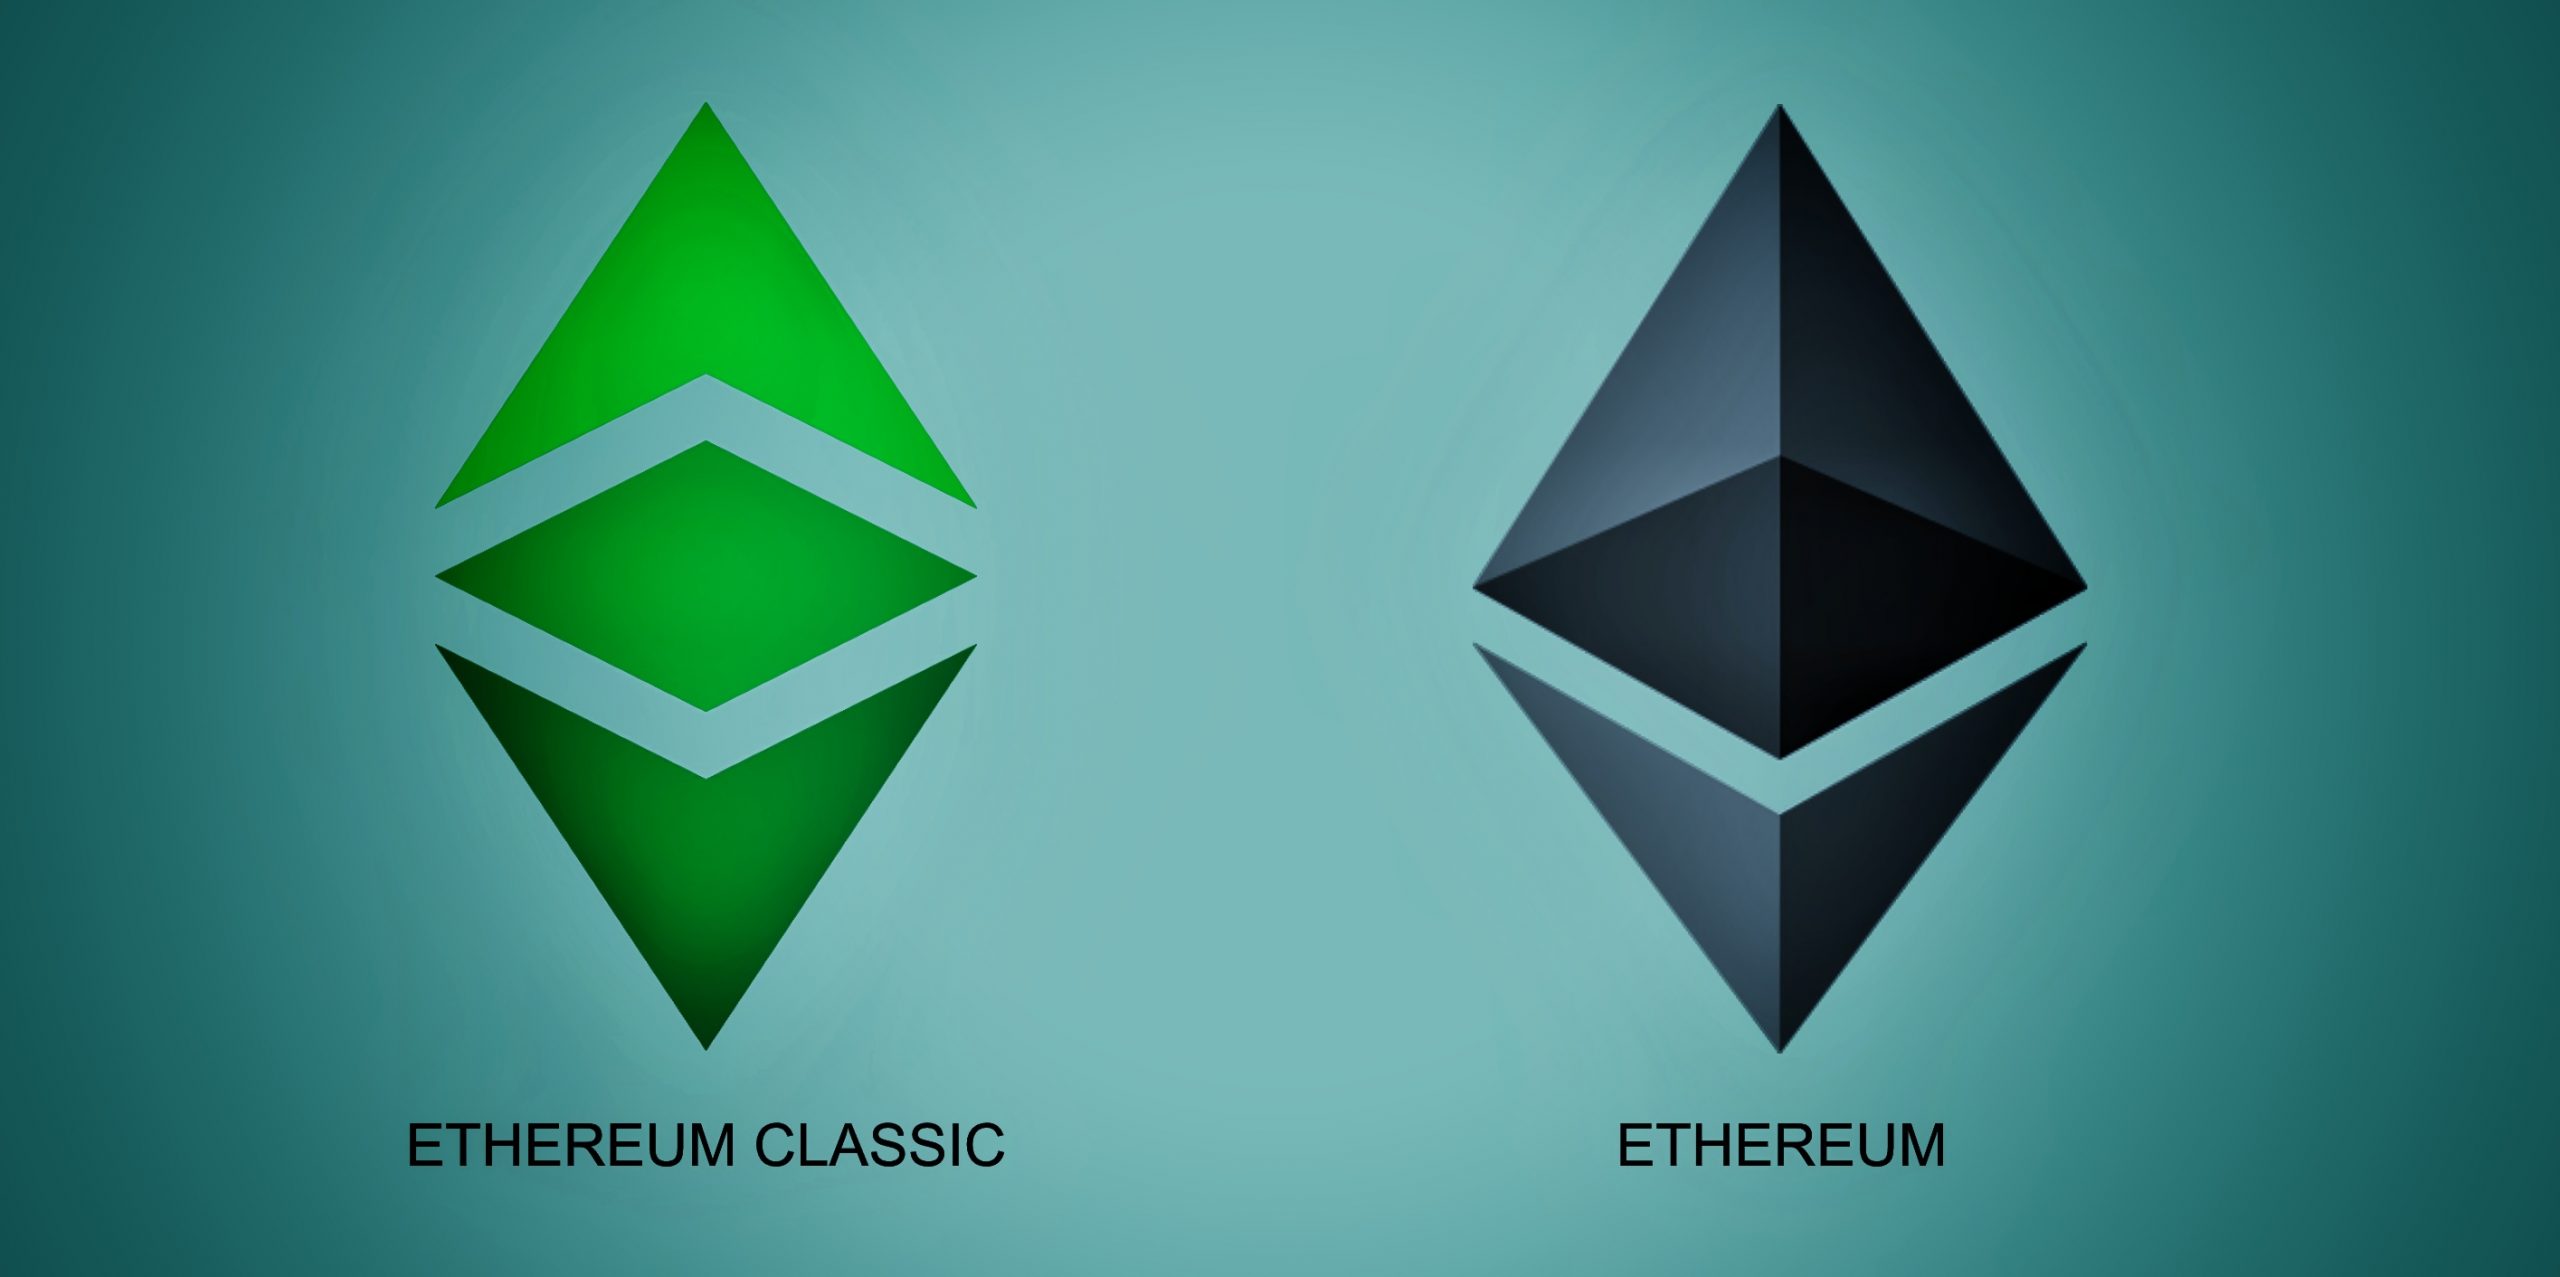 mpm only collecting ethereum classic